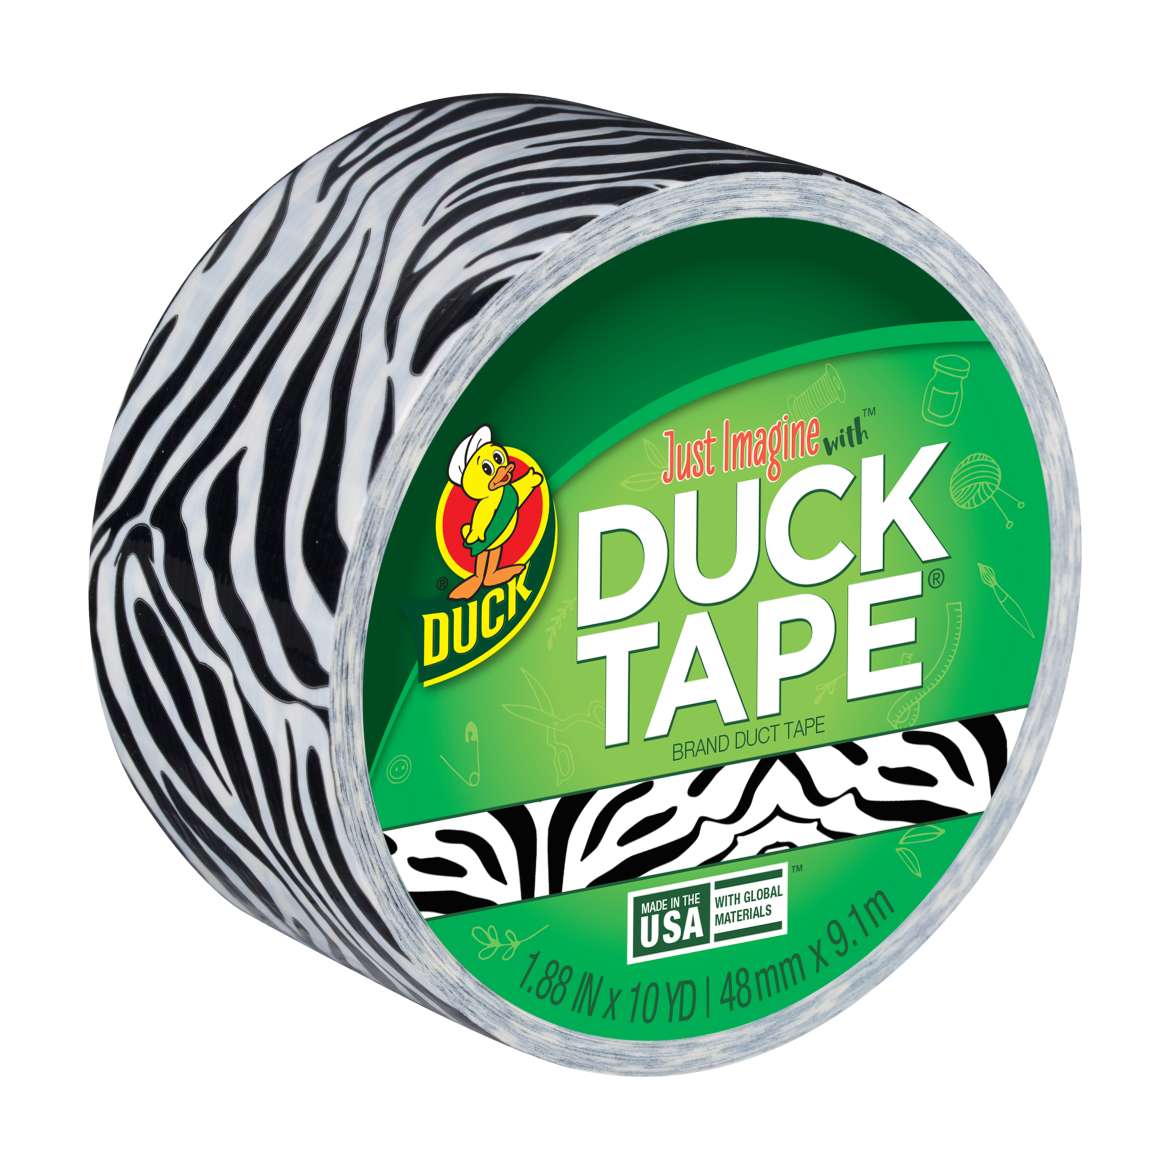 Printed Duck Tape® Brand Duct Tape - Zebra, 1.88 in. x 10 yd.